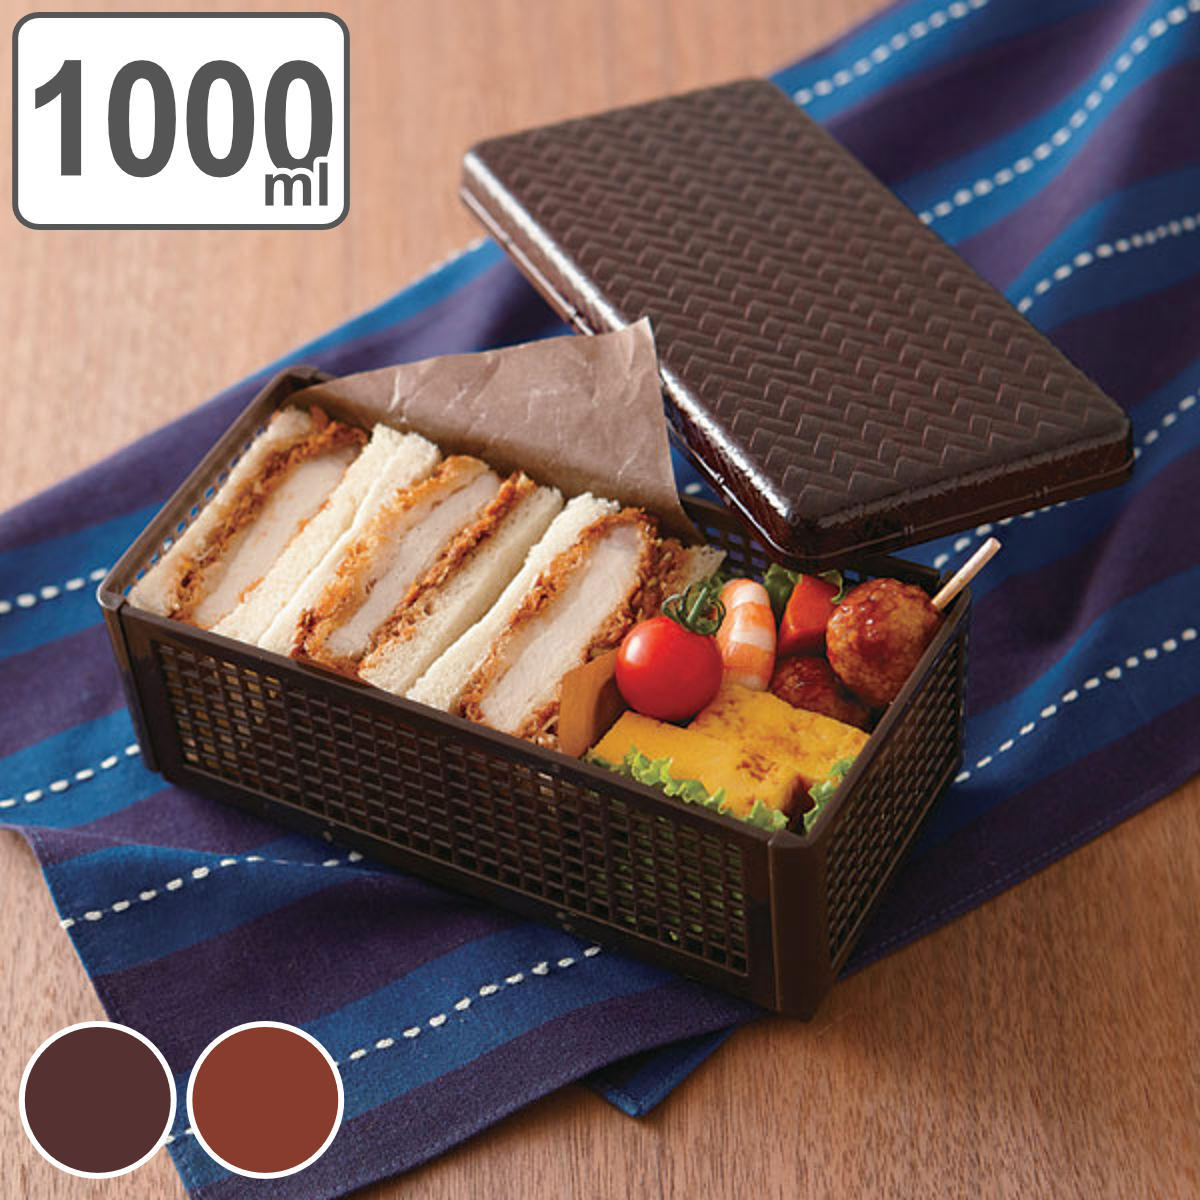  sandwich case 1000ml... bamboo .( Sand wichi case . lunch box lunch box ... lunch box 1 step adult )